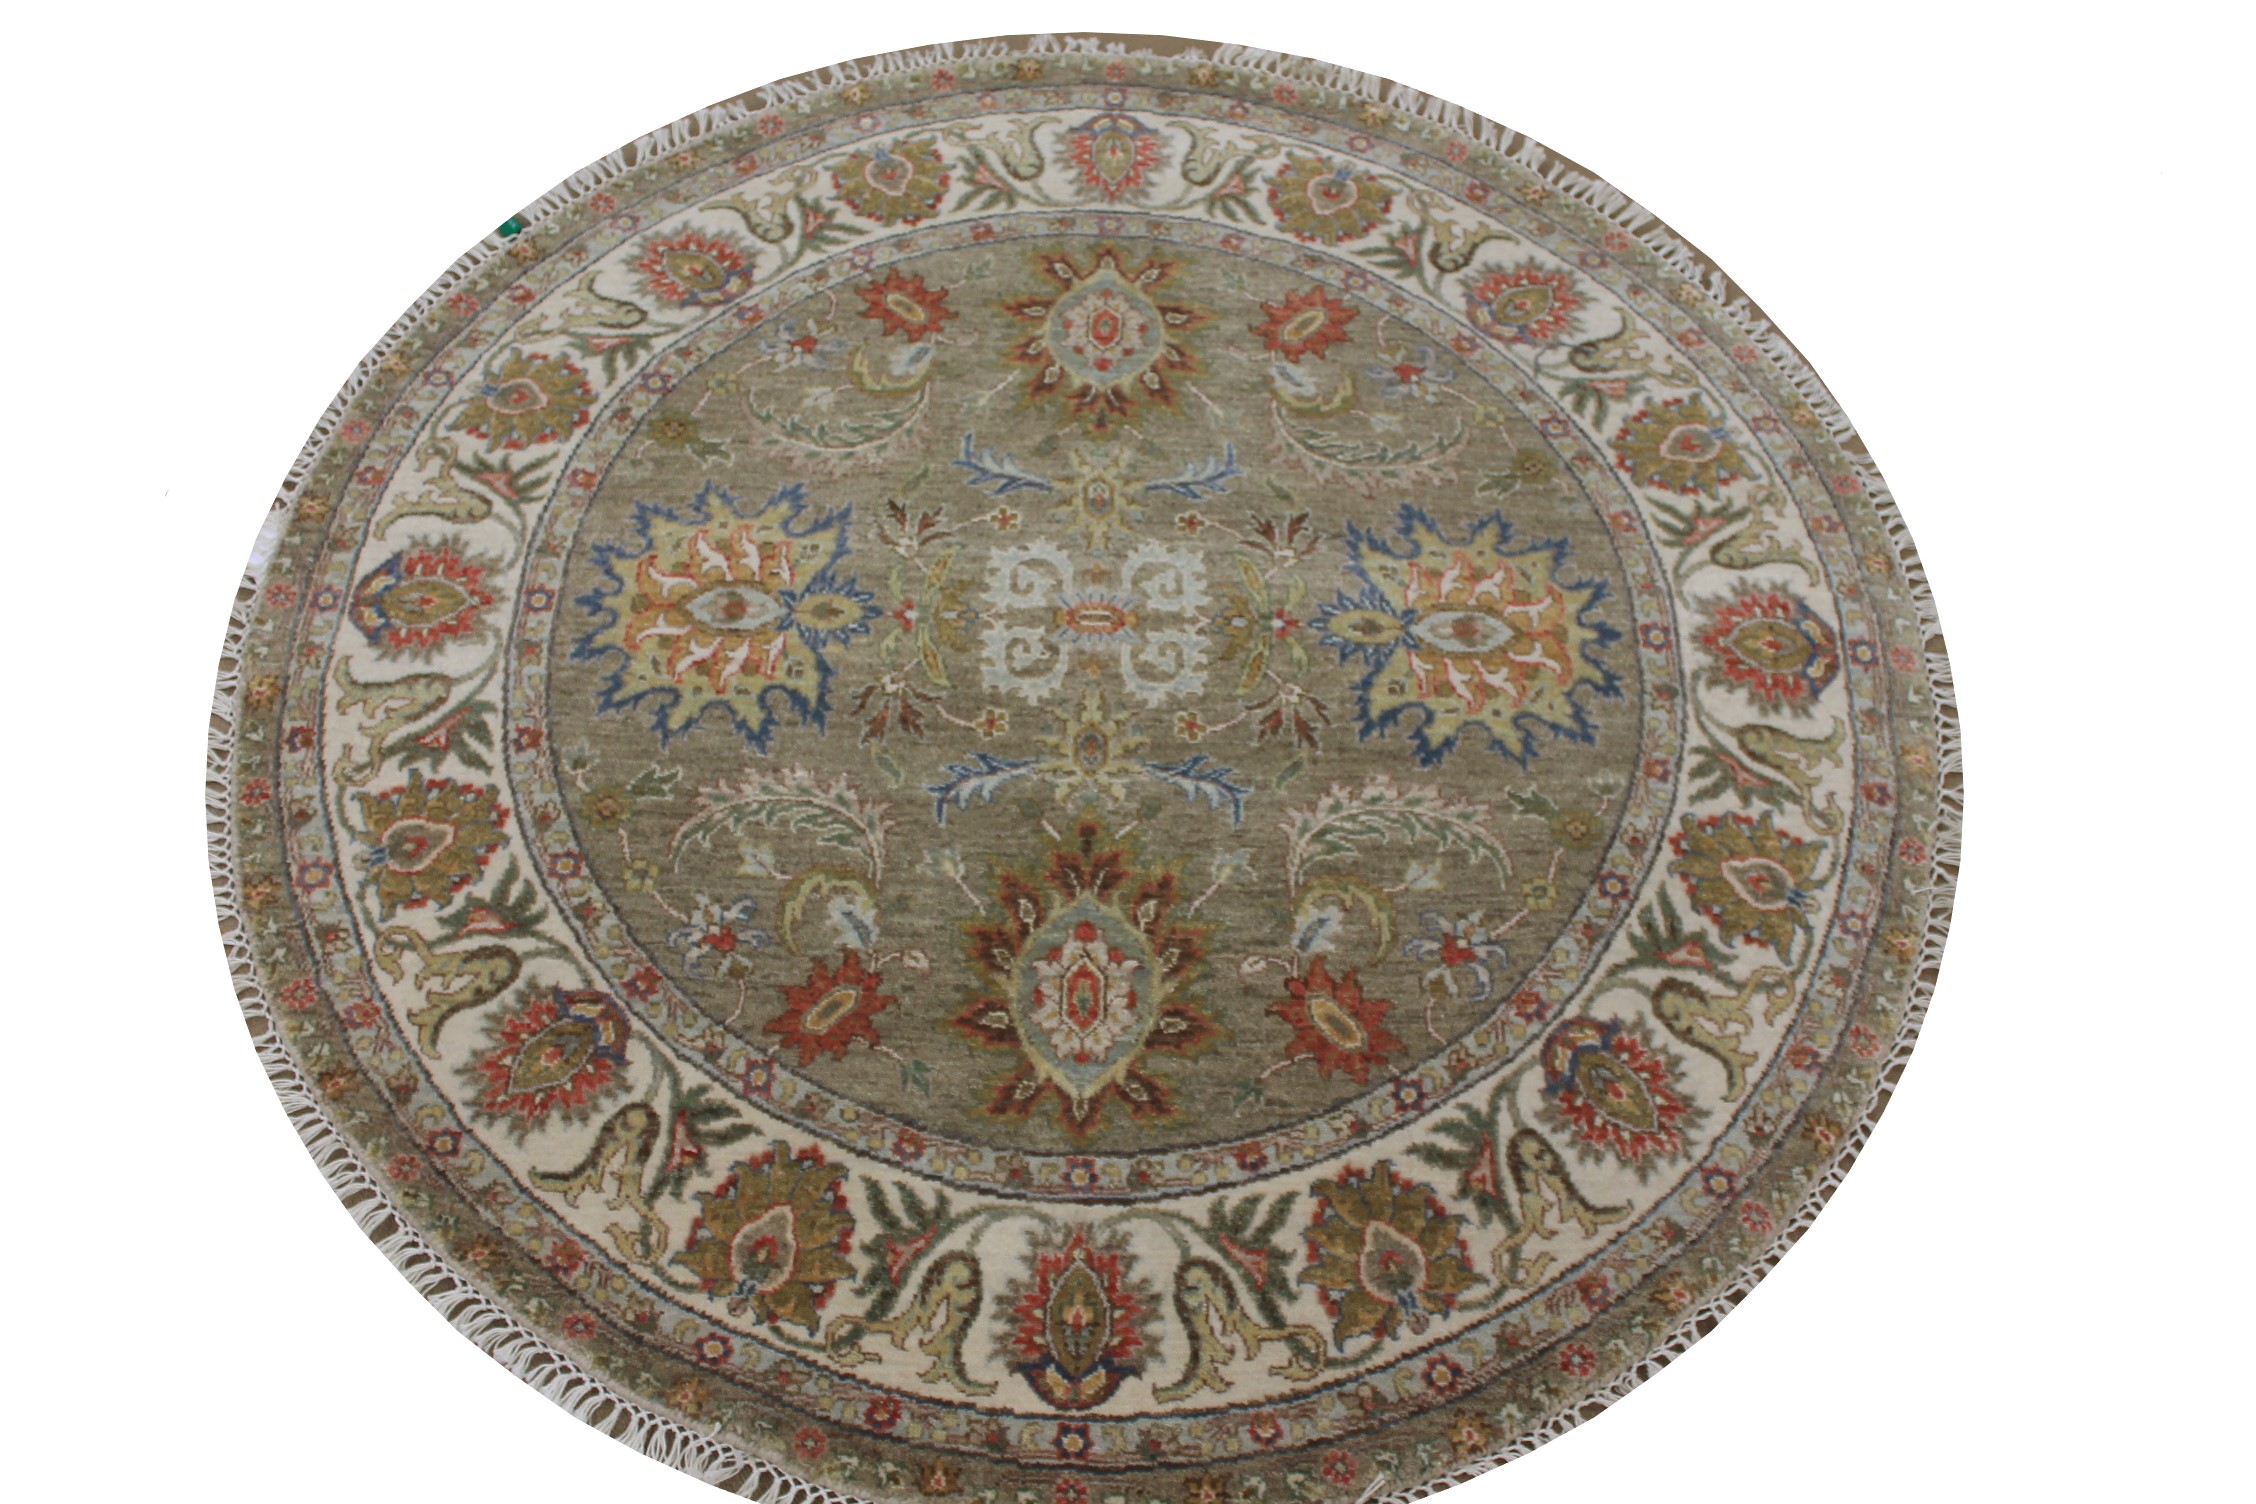 5 ft. Round & Square Traditional Hand Knotted Wool Area Rug - MR025055